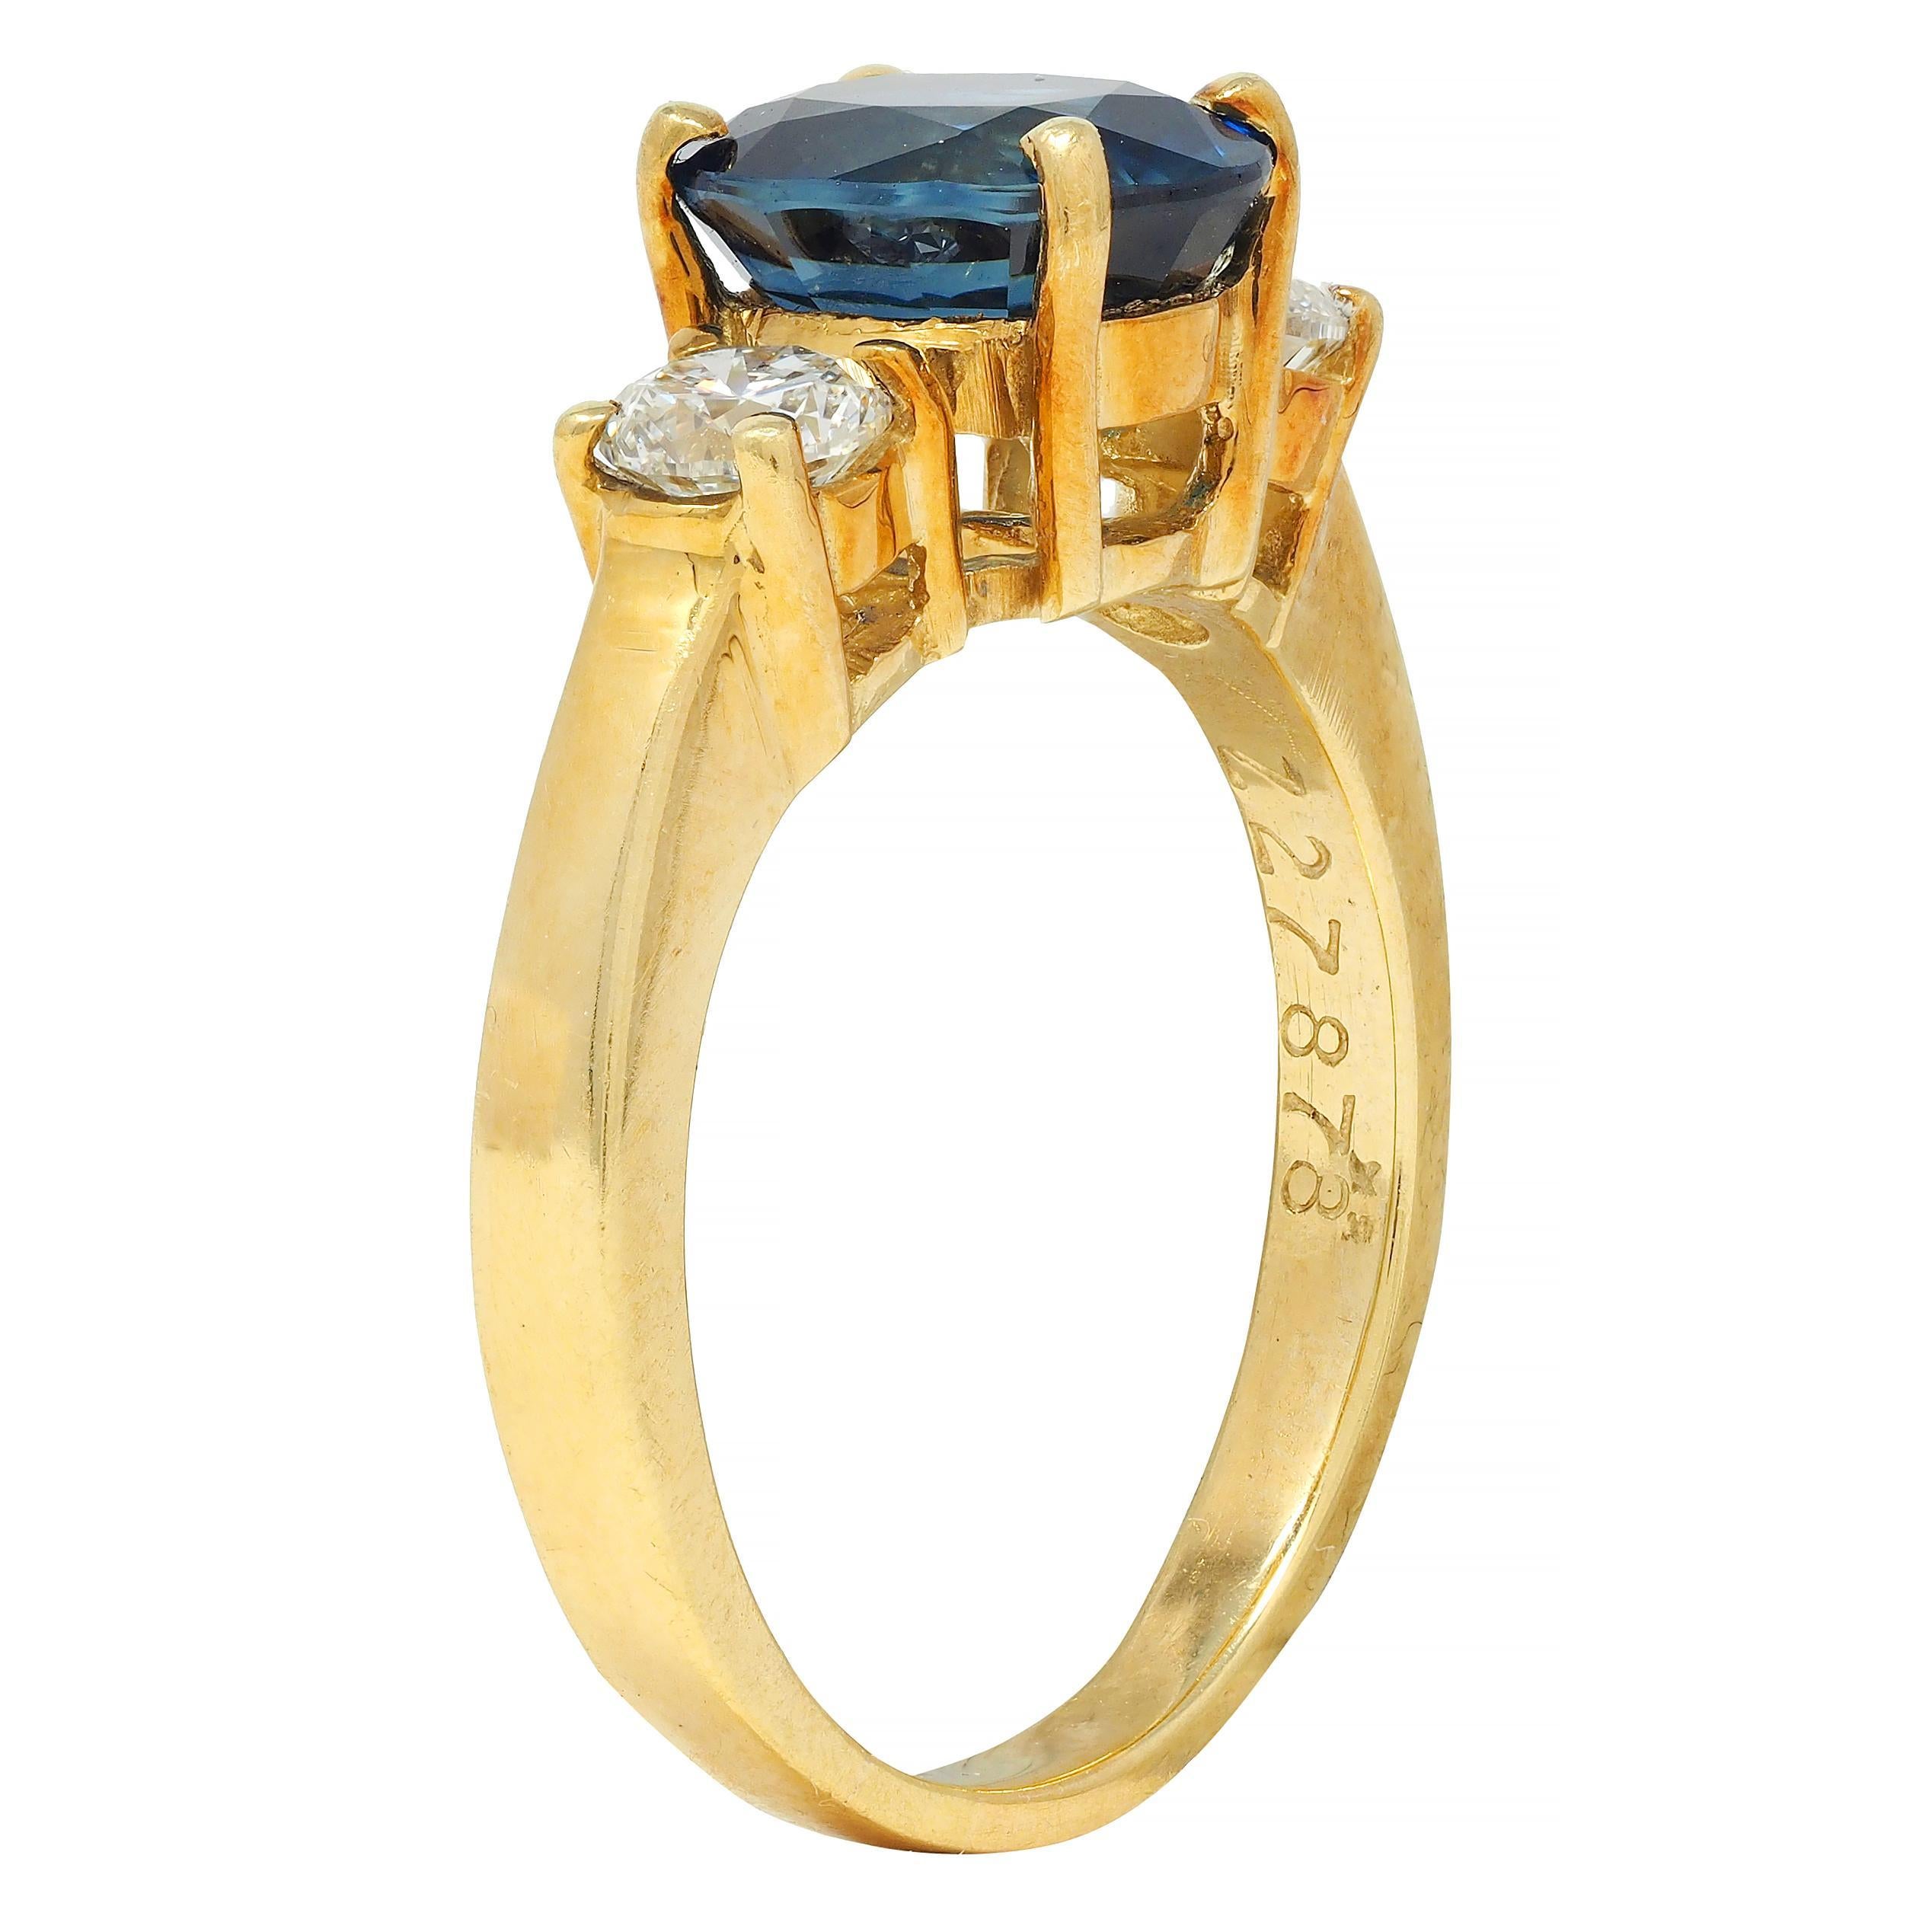 Centering an oval cut sapphire weighing 1.86 carats total - transparent deep blue in color 
Natural Thai in origin - prong set in basket and flanked by prong set diamond shoulders
Weighing approximately 0.46 carat total - G color with VS2 to SI1